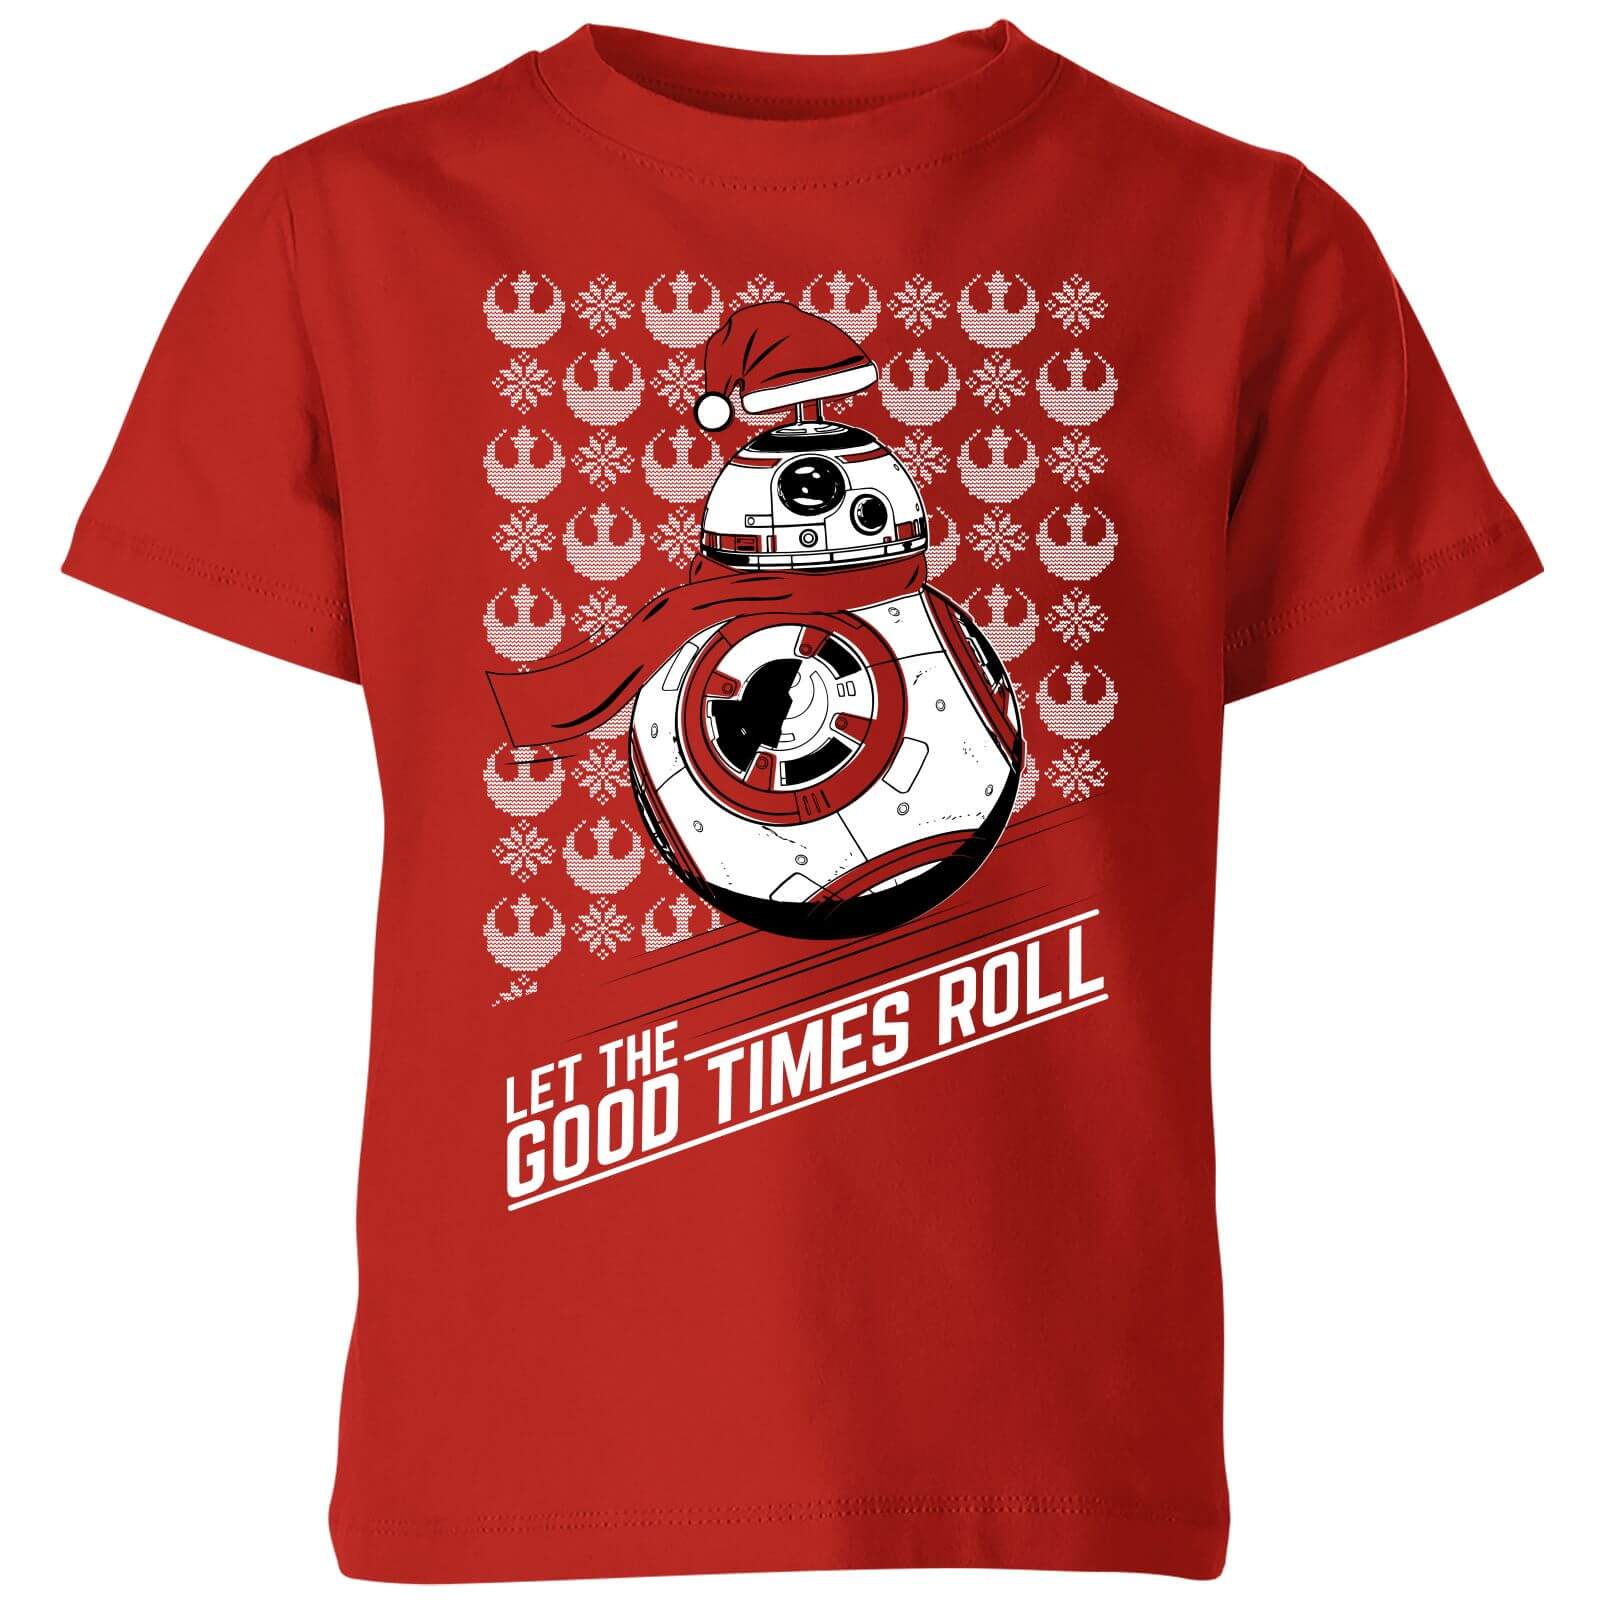 Star Wars Let The Good Times Roll Kids Christmas T-Shirt - Red - 9-10 Years